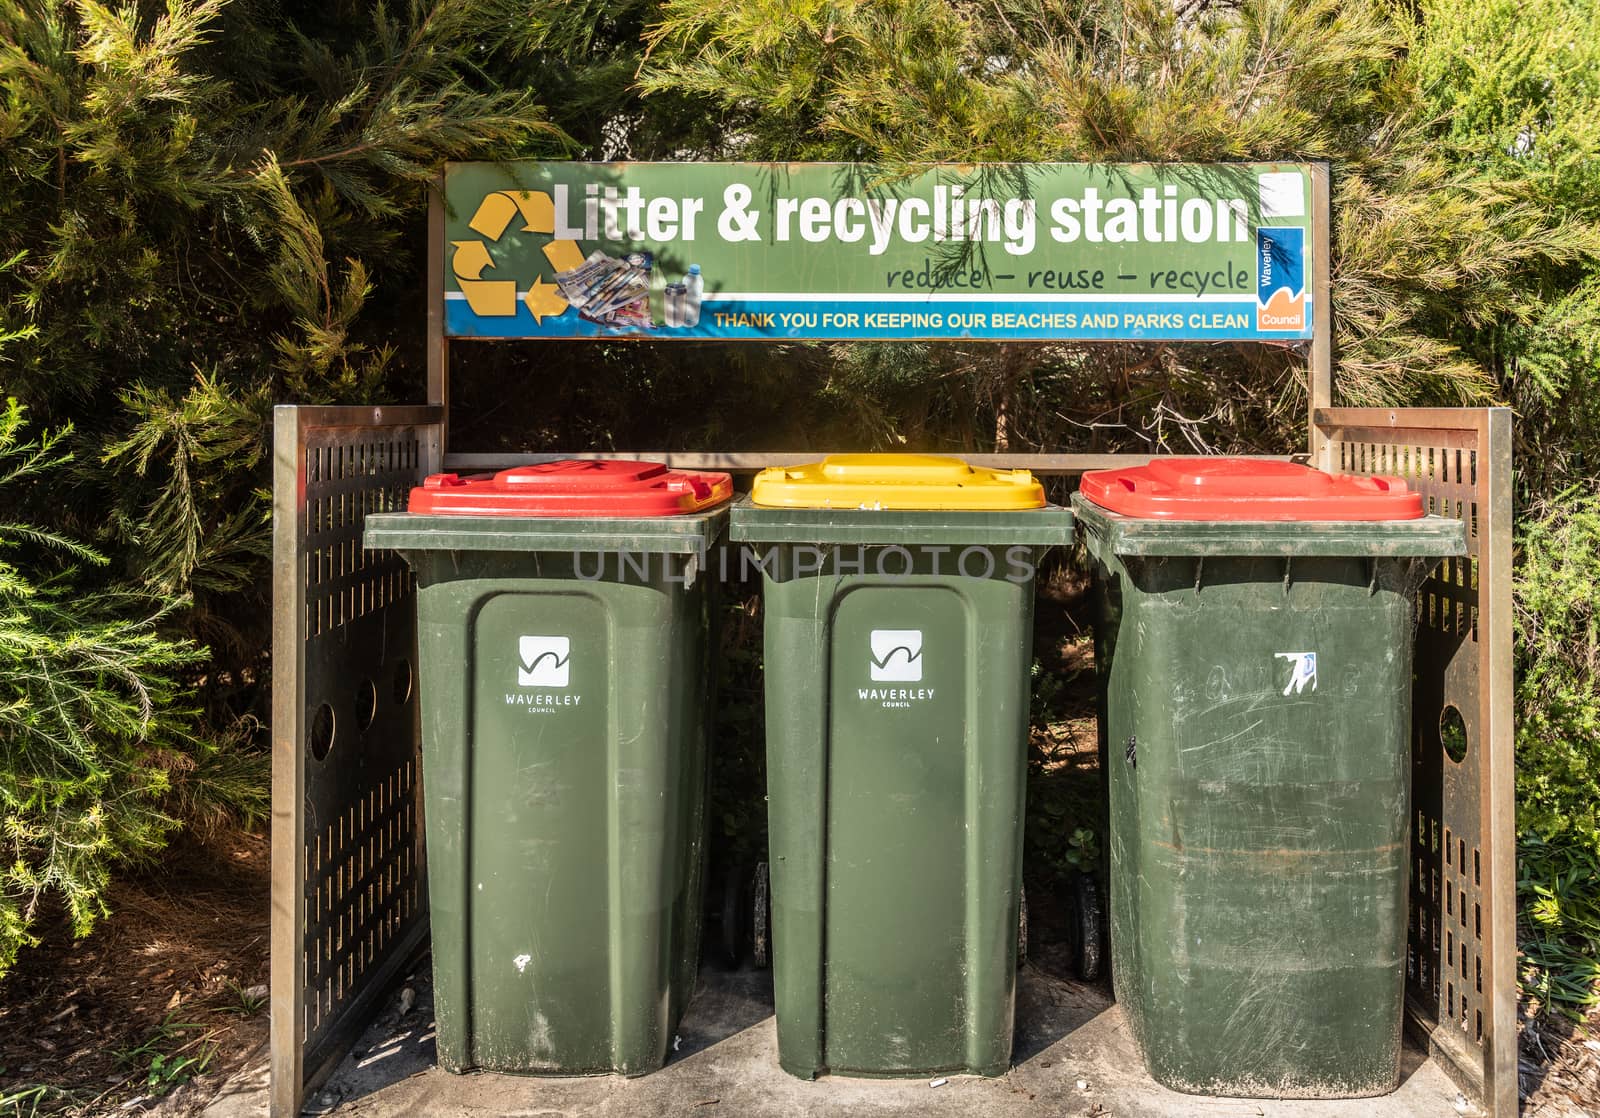 Sydney, Australia - February 11, 2019: Three green trash bins at the Liter and Recycling station on Tamarama Beach. Neatly set in an alcove backed by green vegetation.